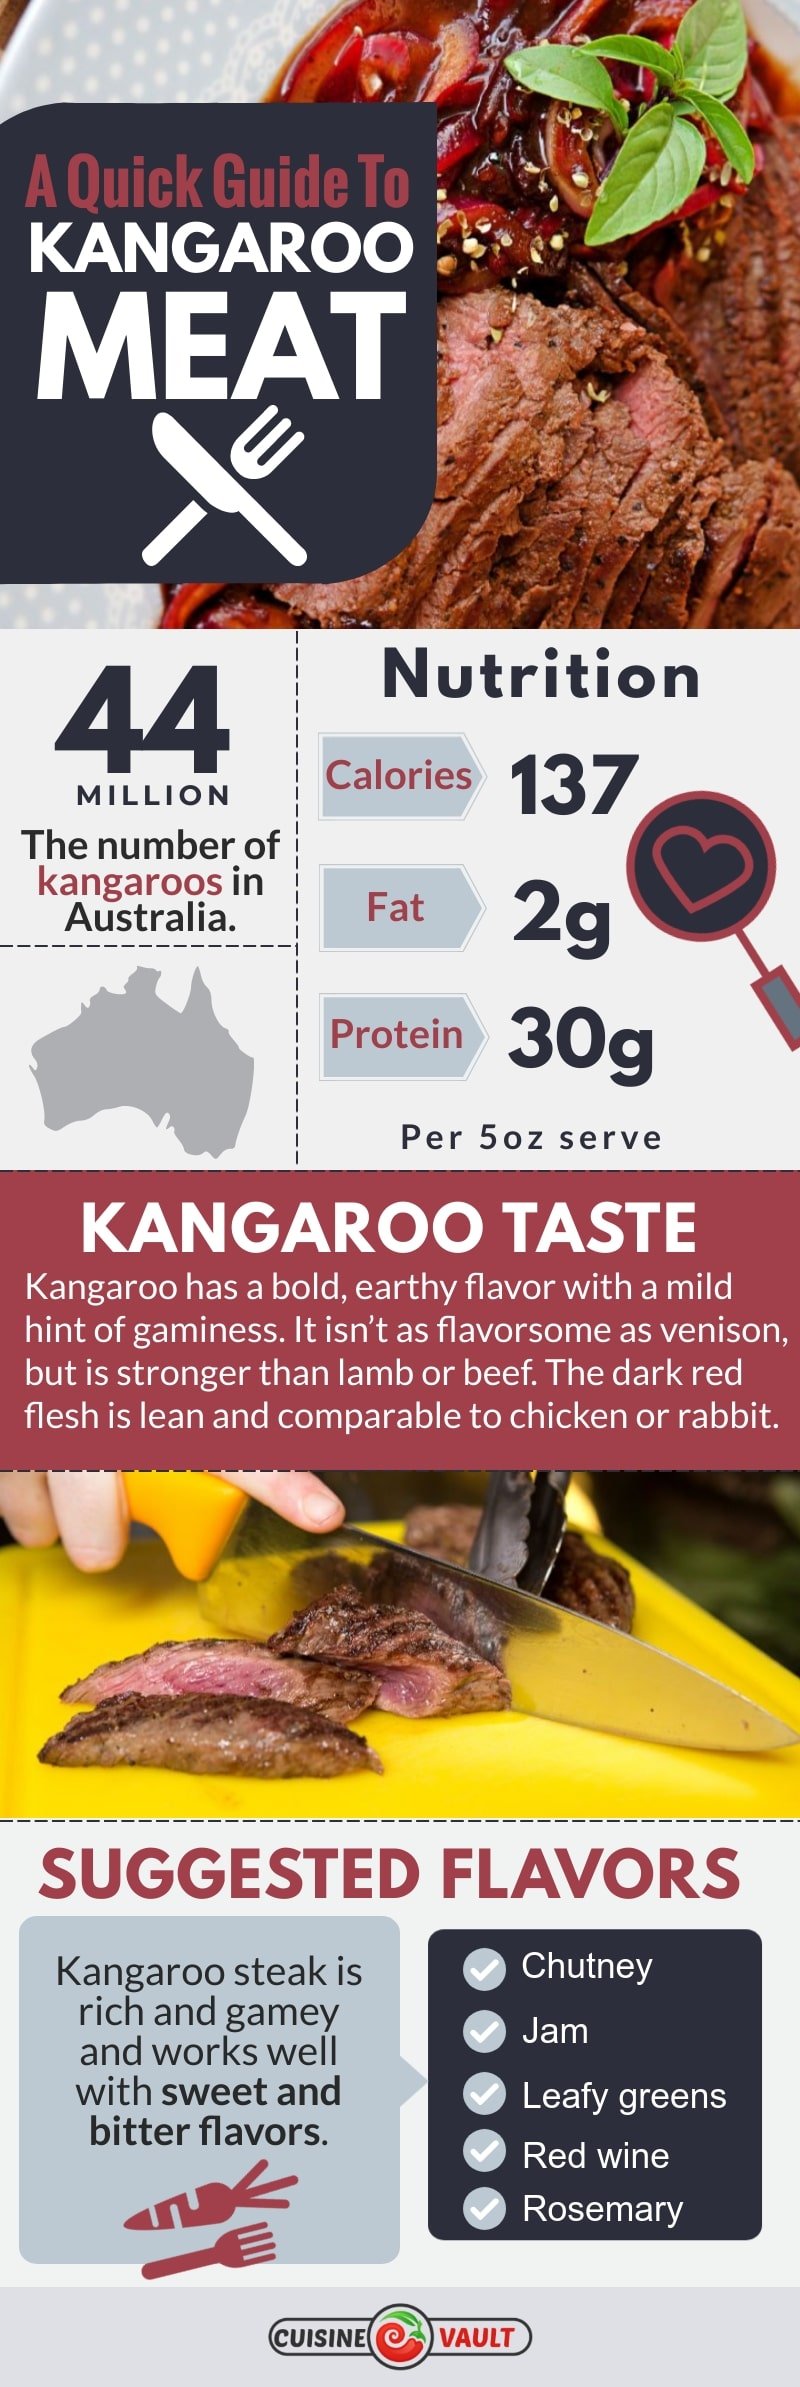 Guide to kangaroo meat infographic